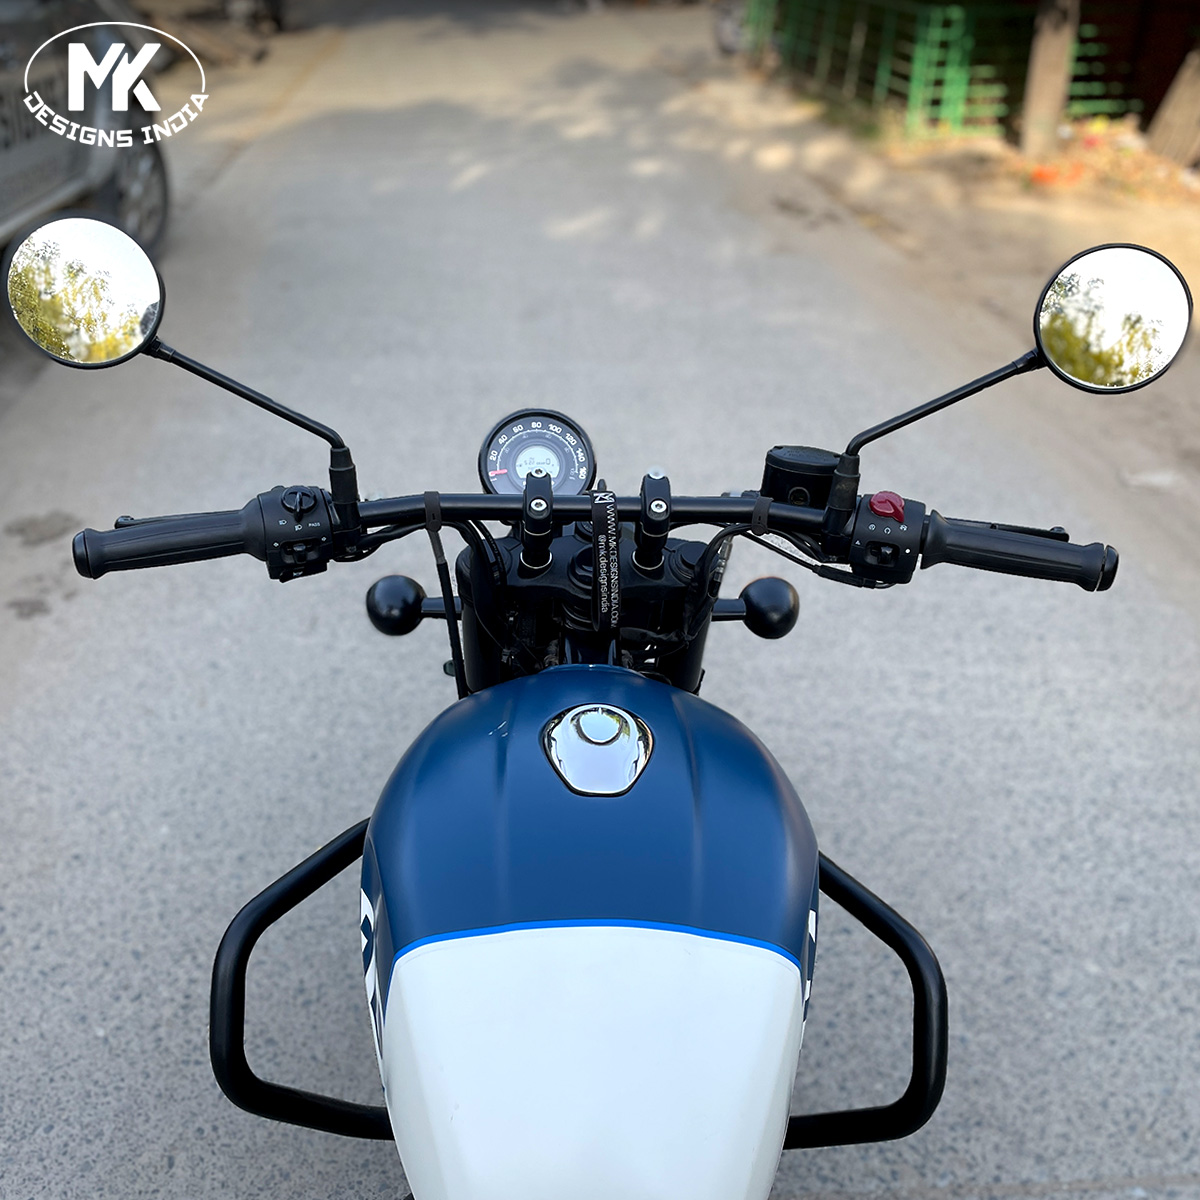 Mk Designs Drag Handle Bar with Risers for Royal Enfield Hunter 350